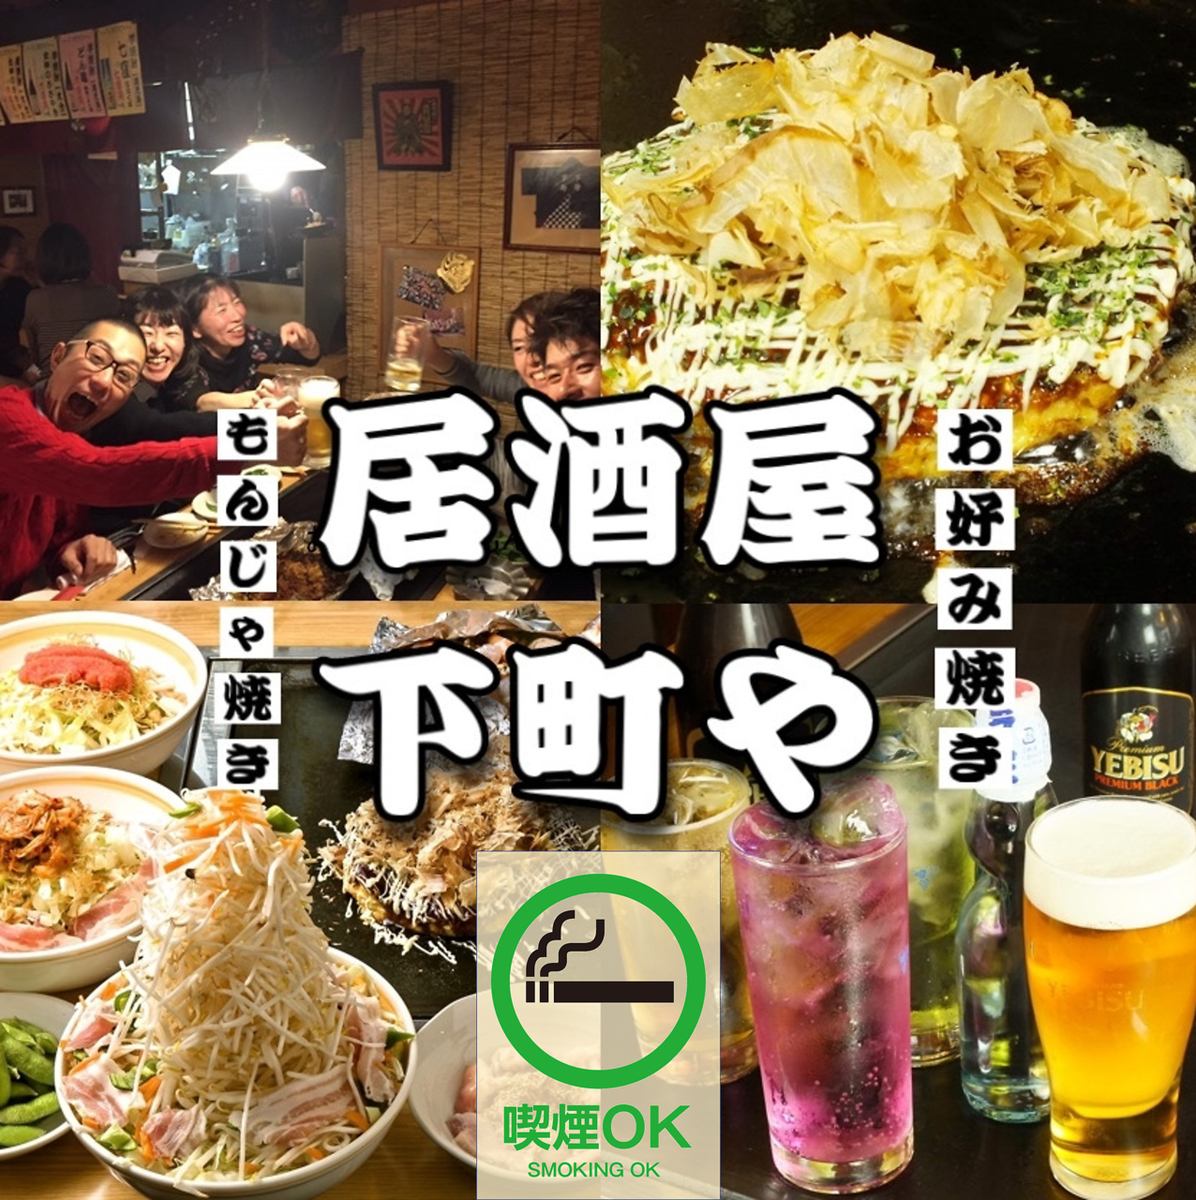 Founded 15 years ago! Authentic Tsukishima Monjayaki! "Mentai Mochi", "Curry", "Seafood"... There are many kinds!